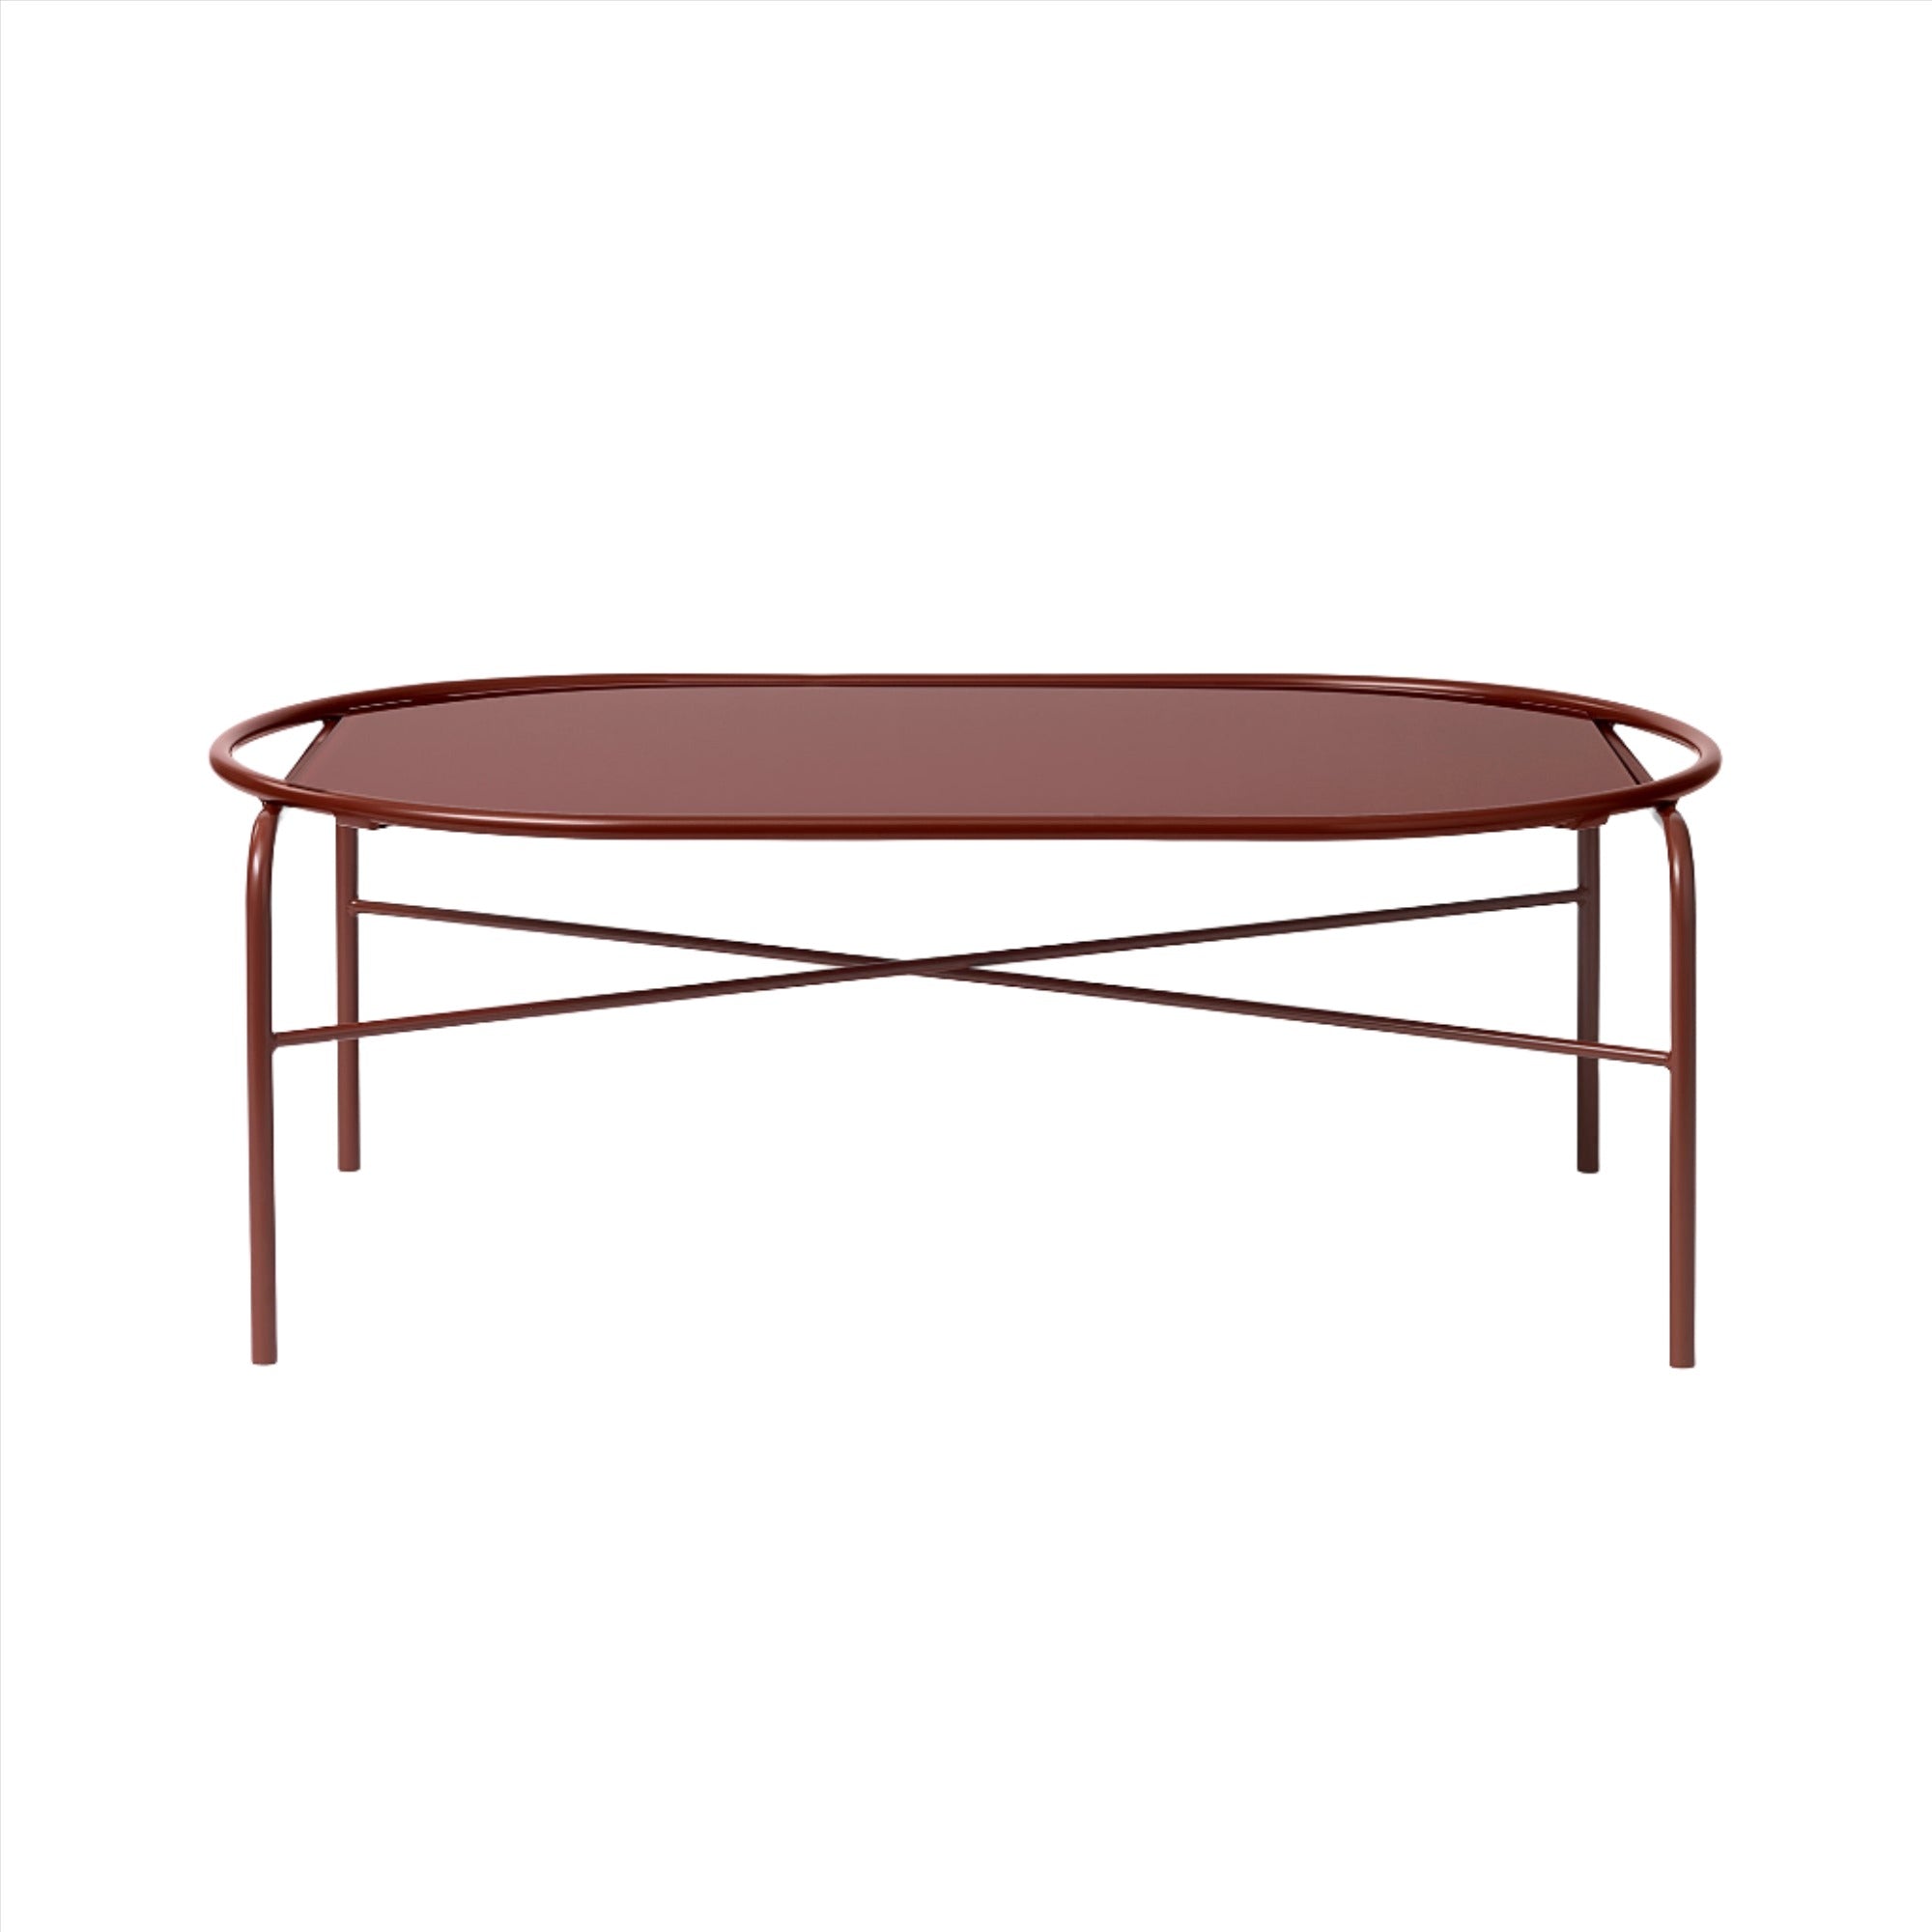 Secant Coffee Table: Oval + Oxide Red + Redish Glass